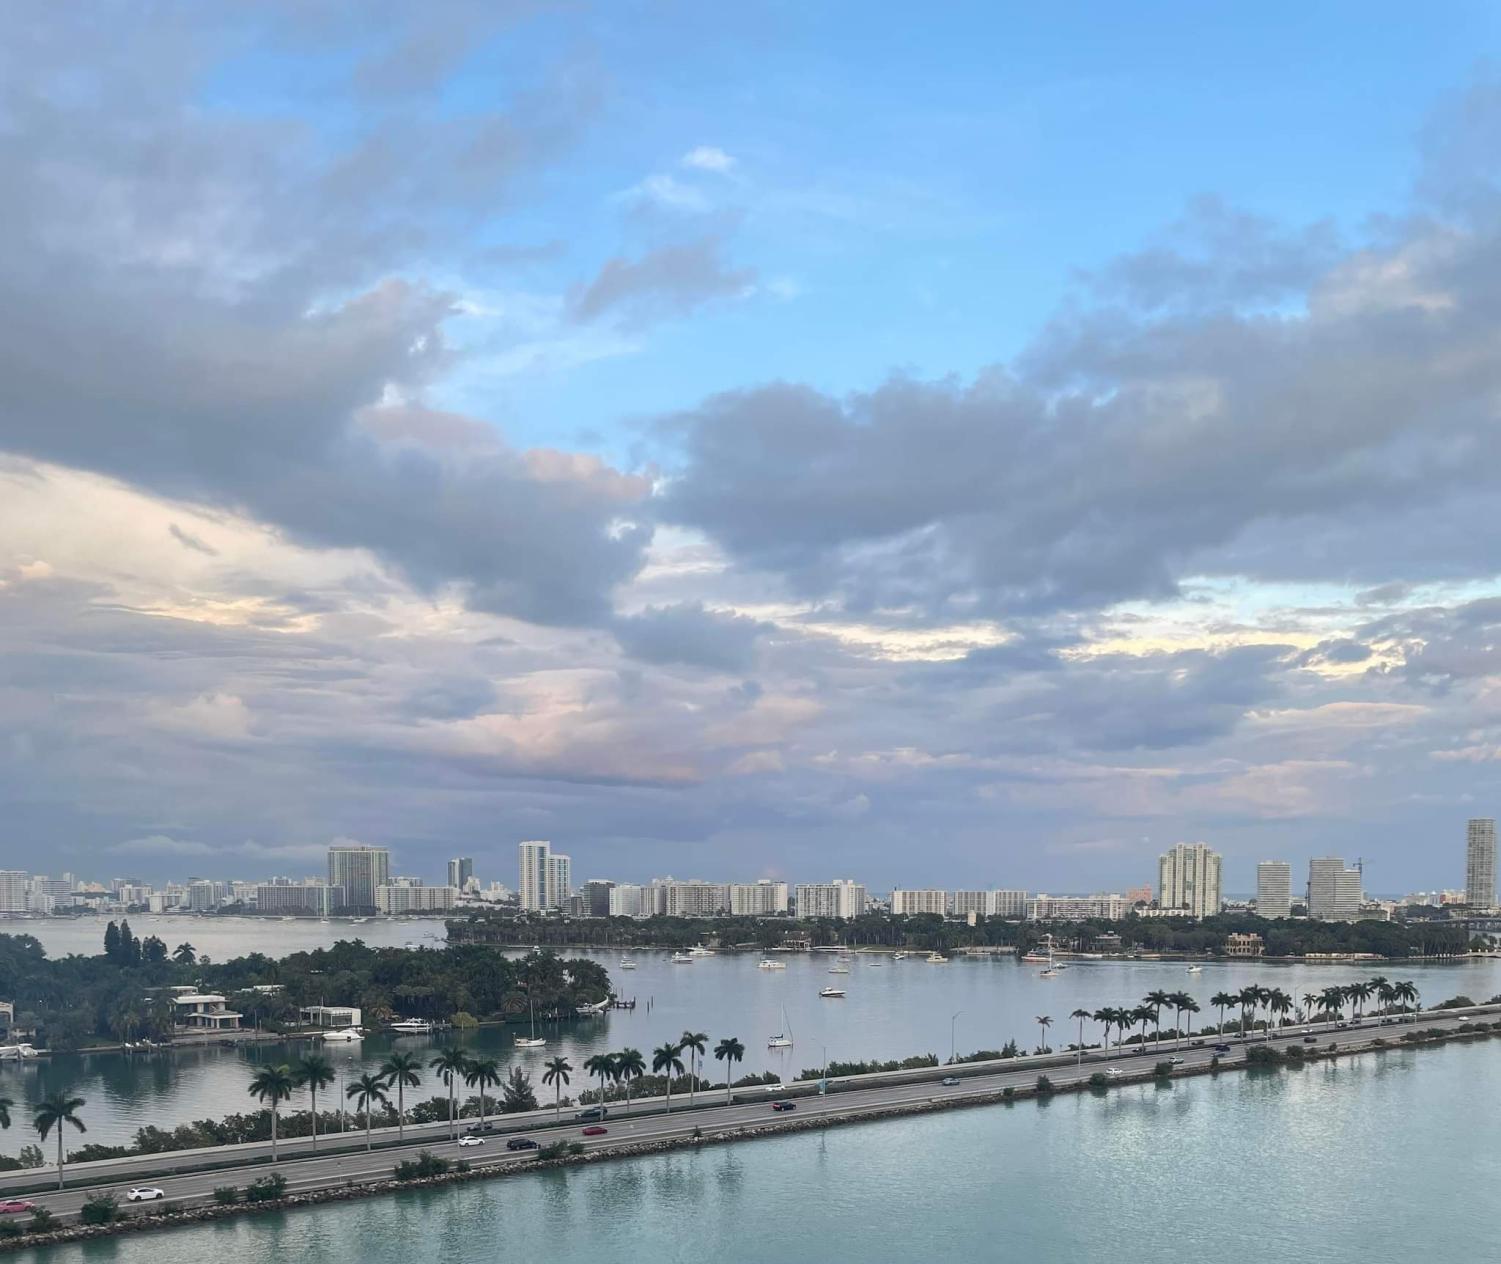 Goodbye, Miami! This was the beautiful view as we set sail for our seven day Caribbean Cruise! Everyone was so excited to get the trip started!